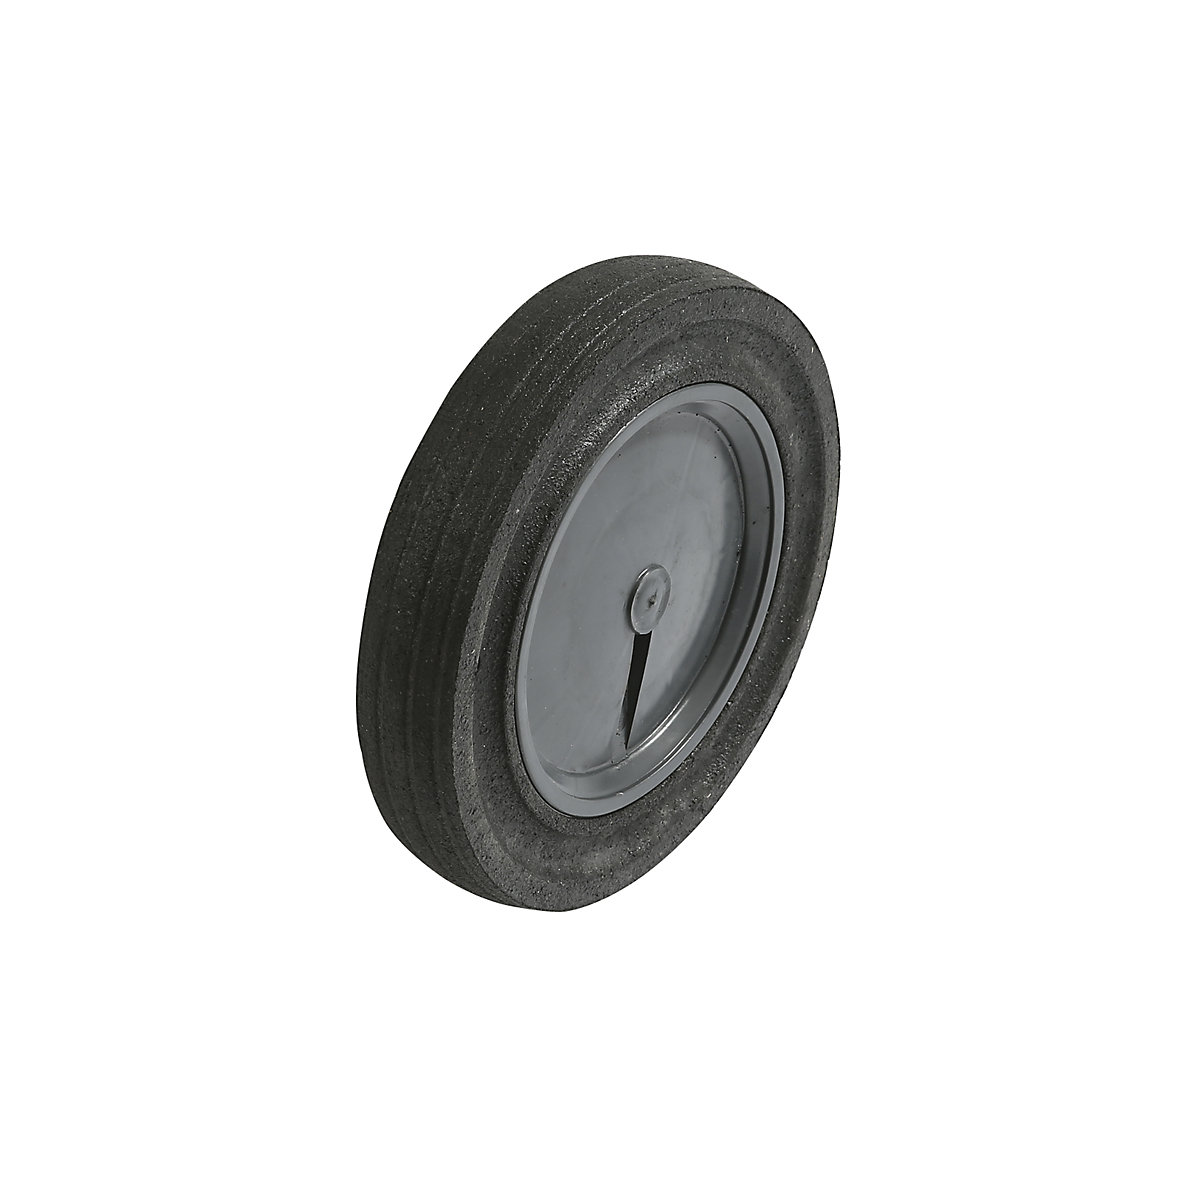 Spare wheel for large waste bin